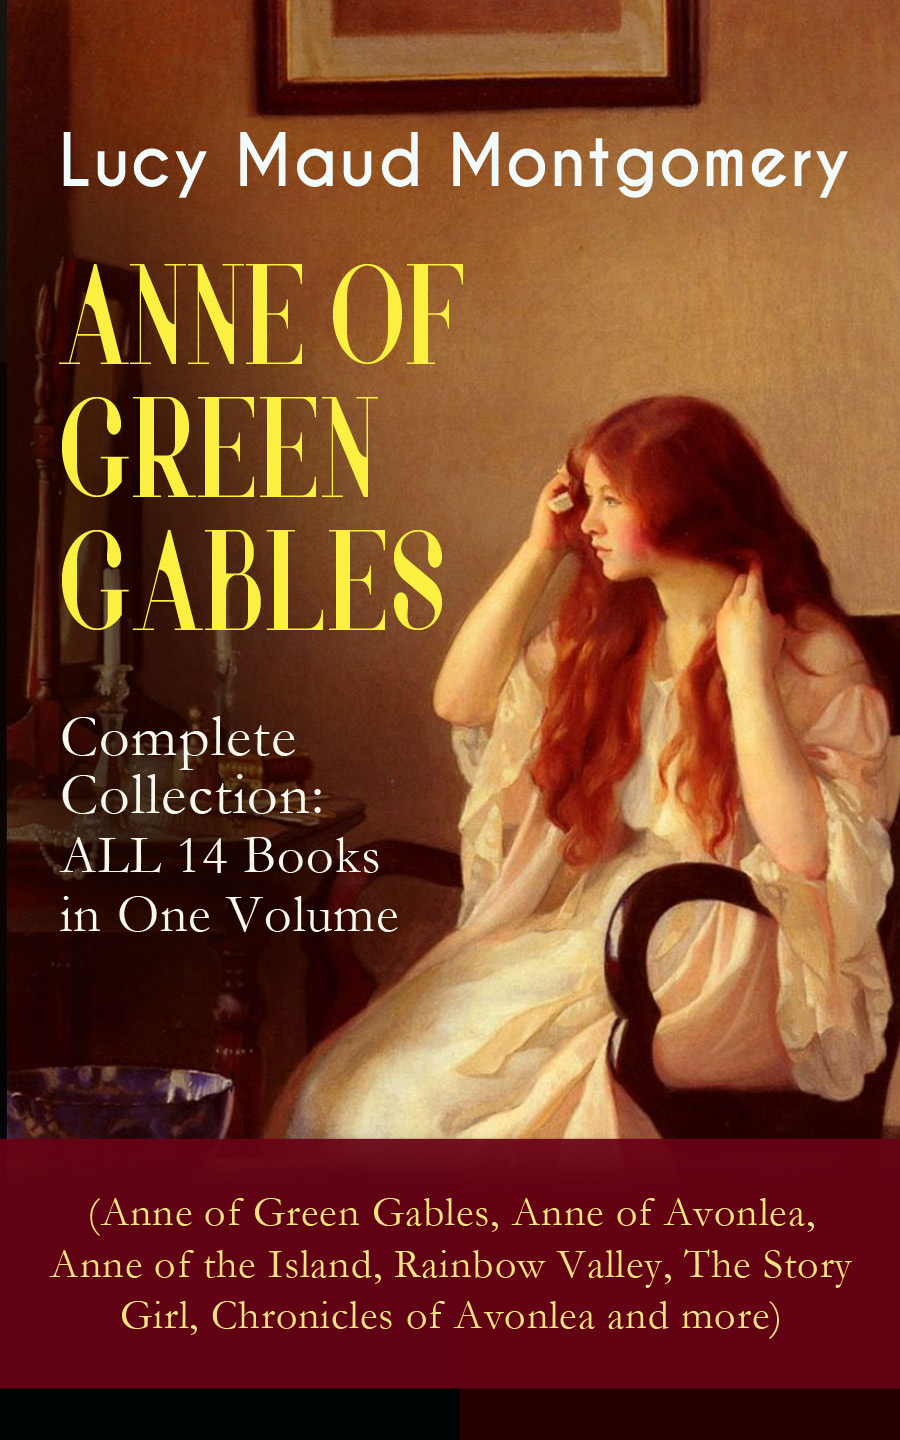 ANNE OF GREEN GABLES - Complete Collection: ALL 14 Books in One Volume (Anne of Green Gables, Anne of Avonlea, Anne of the Island, Rainbow Valley, The Story Girl, Chronicles of Avonlea and more)